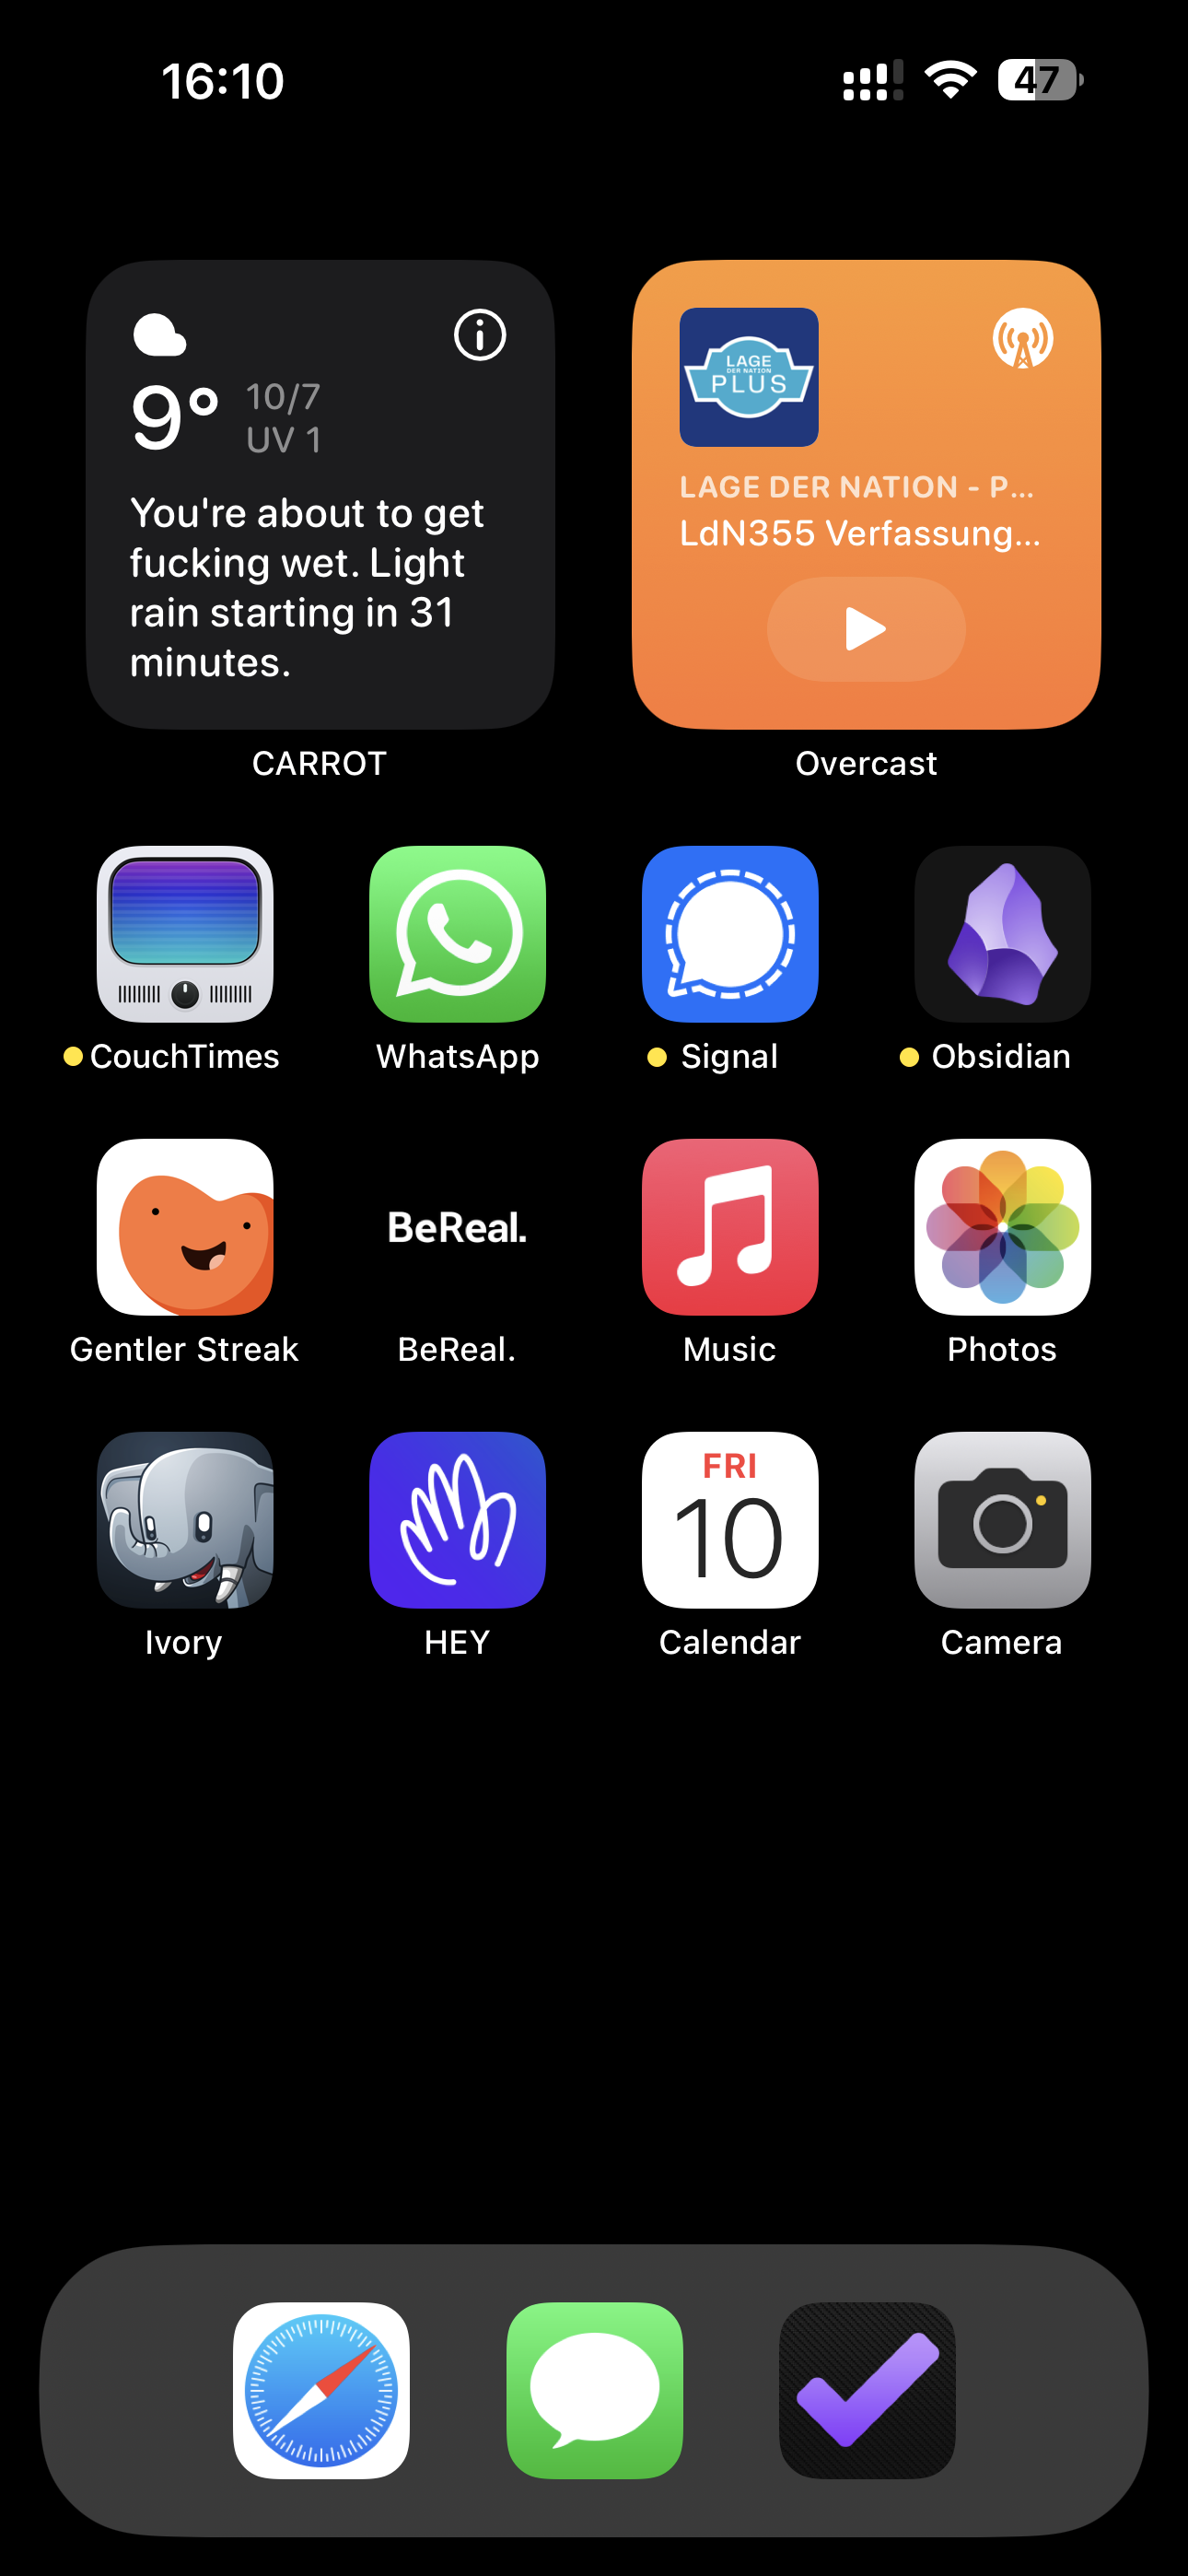 An iPhone Home Screen with a black background. At the top are two small widgets: CARROT weather and Overcast. Below that are three rows of apps: CouchTimes, WhatsApp, Signal, Obsidian, Gentler Streak, BeReal, Music, Photos, Ivory, HEY, Calendar and Camera. The dock has three apps: Safari, Messages & OmniFocus 4